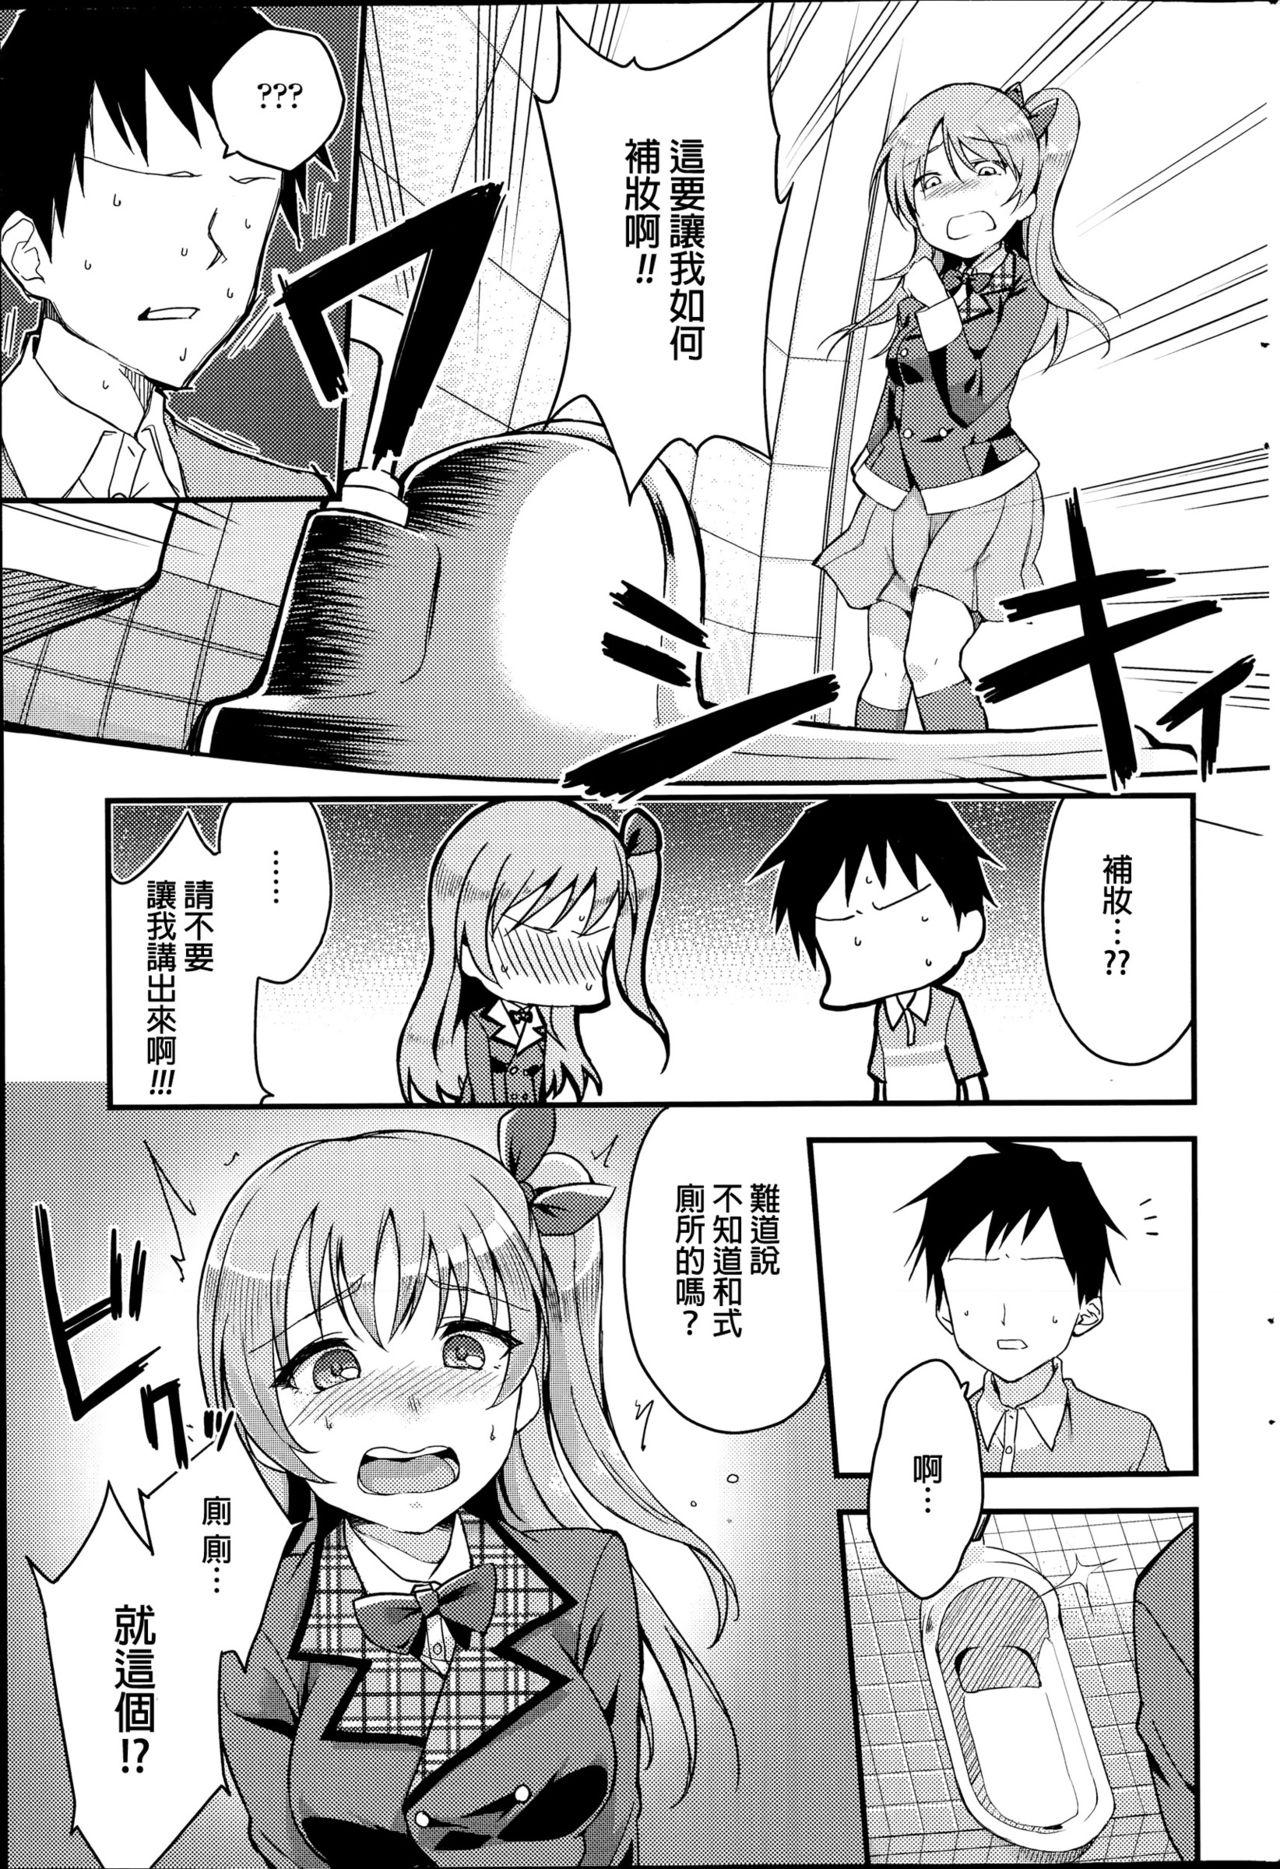 She Ippan Shukujo no Manner | Manners of Lady Story - Page 3